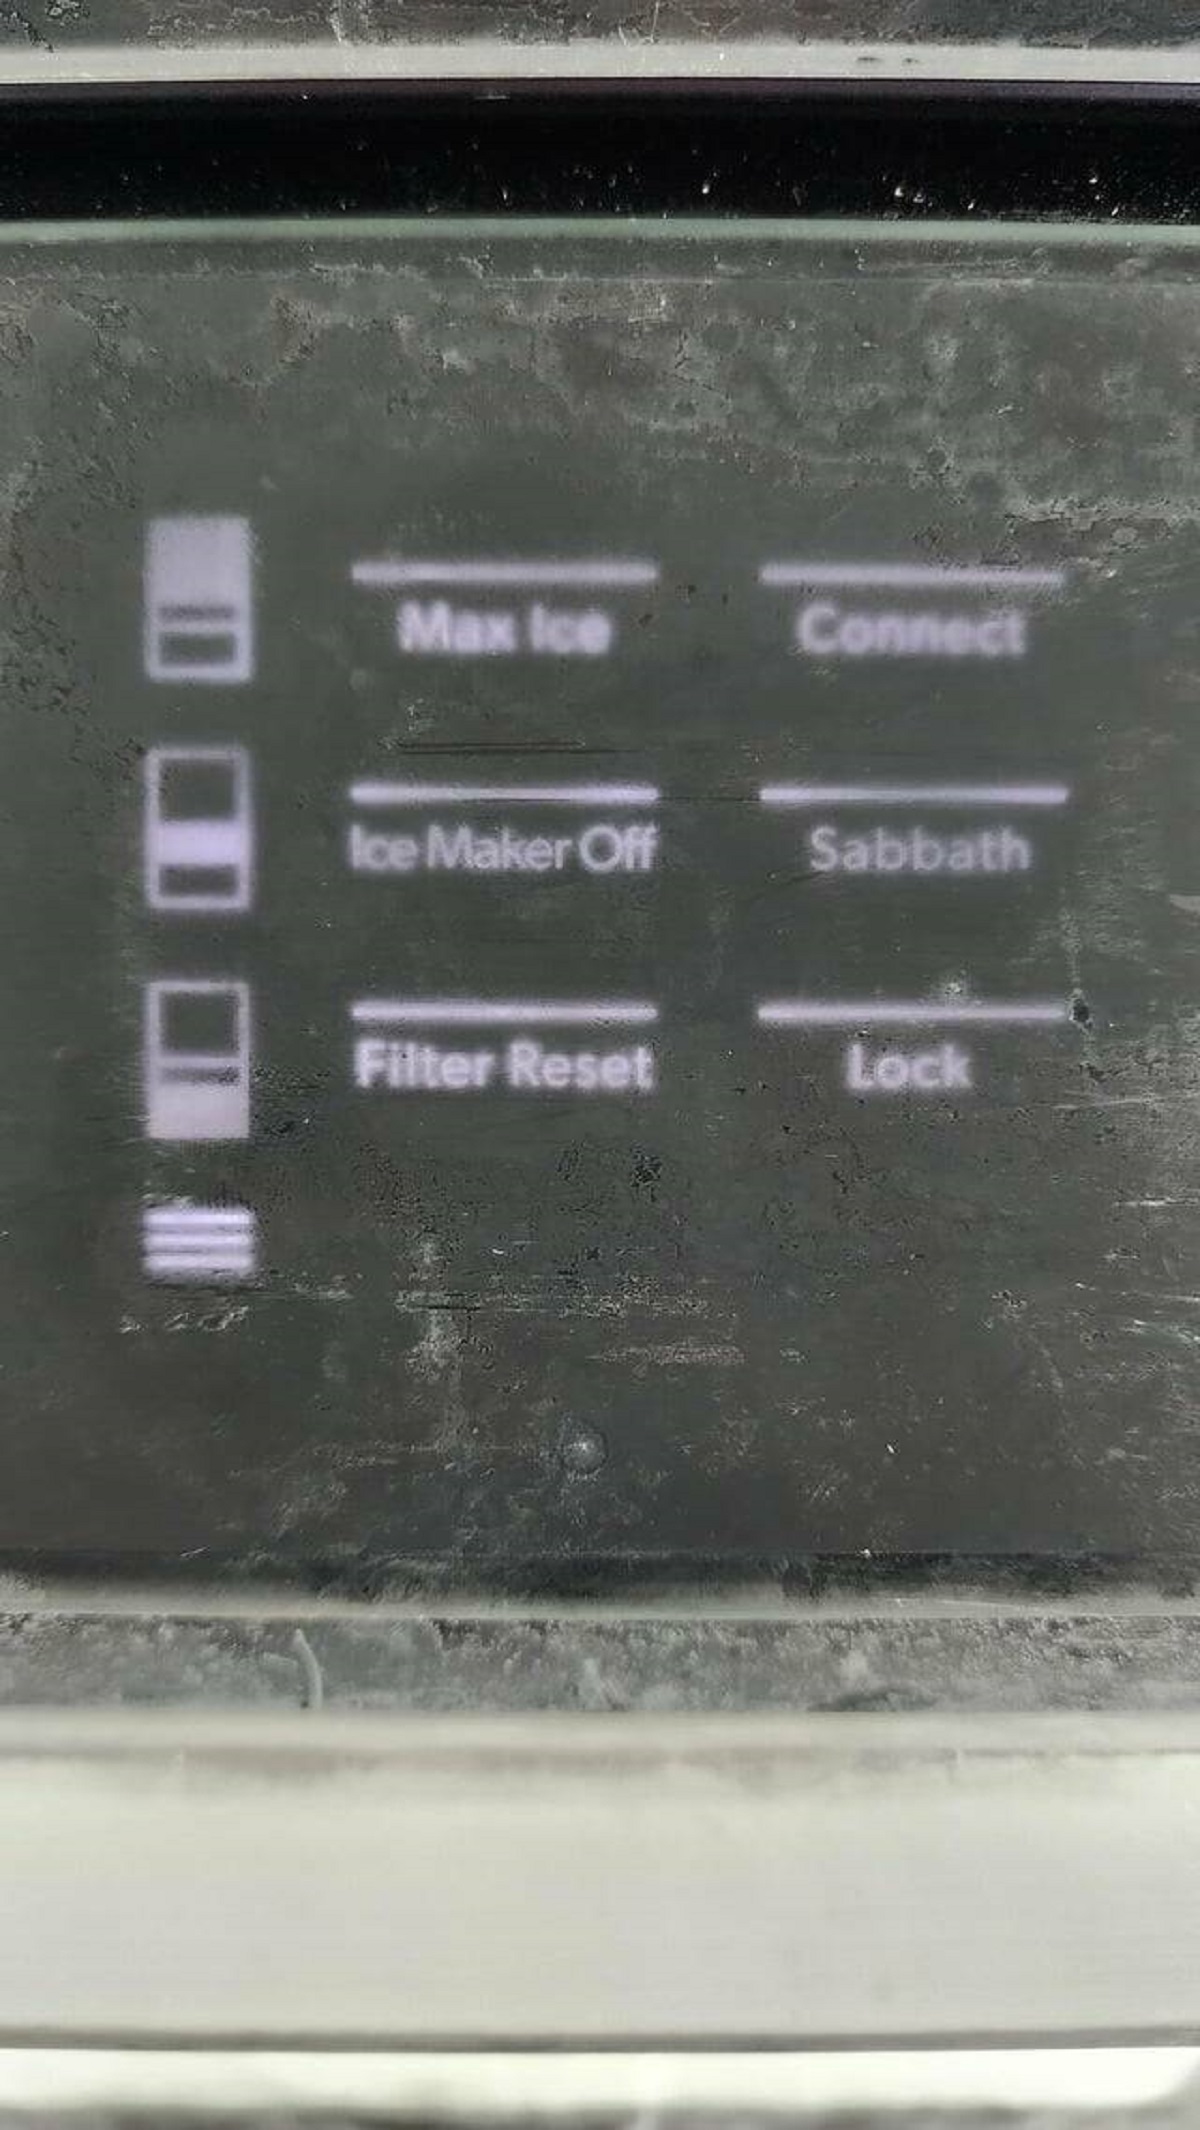 electronics - Max Ice Ice Maker Off Filter Reset Connect Sabbath Lock